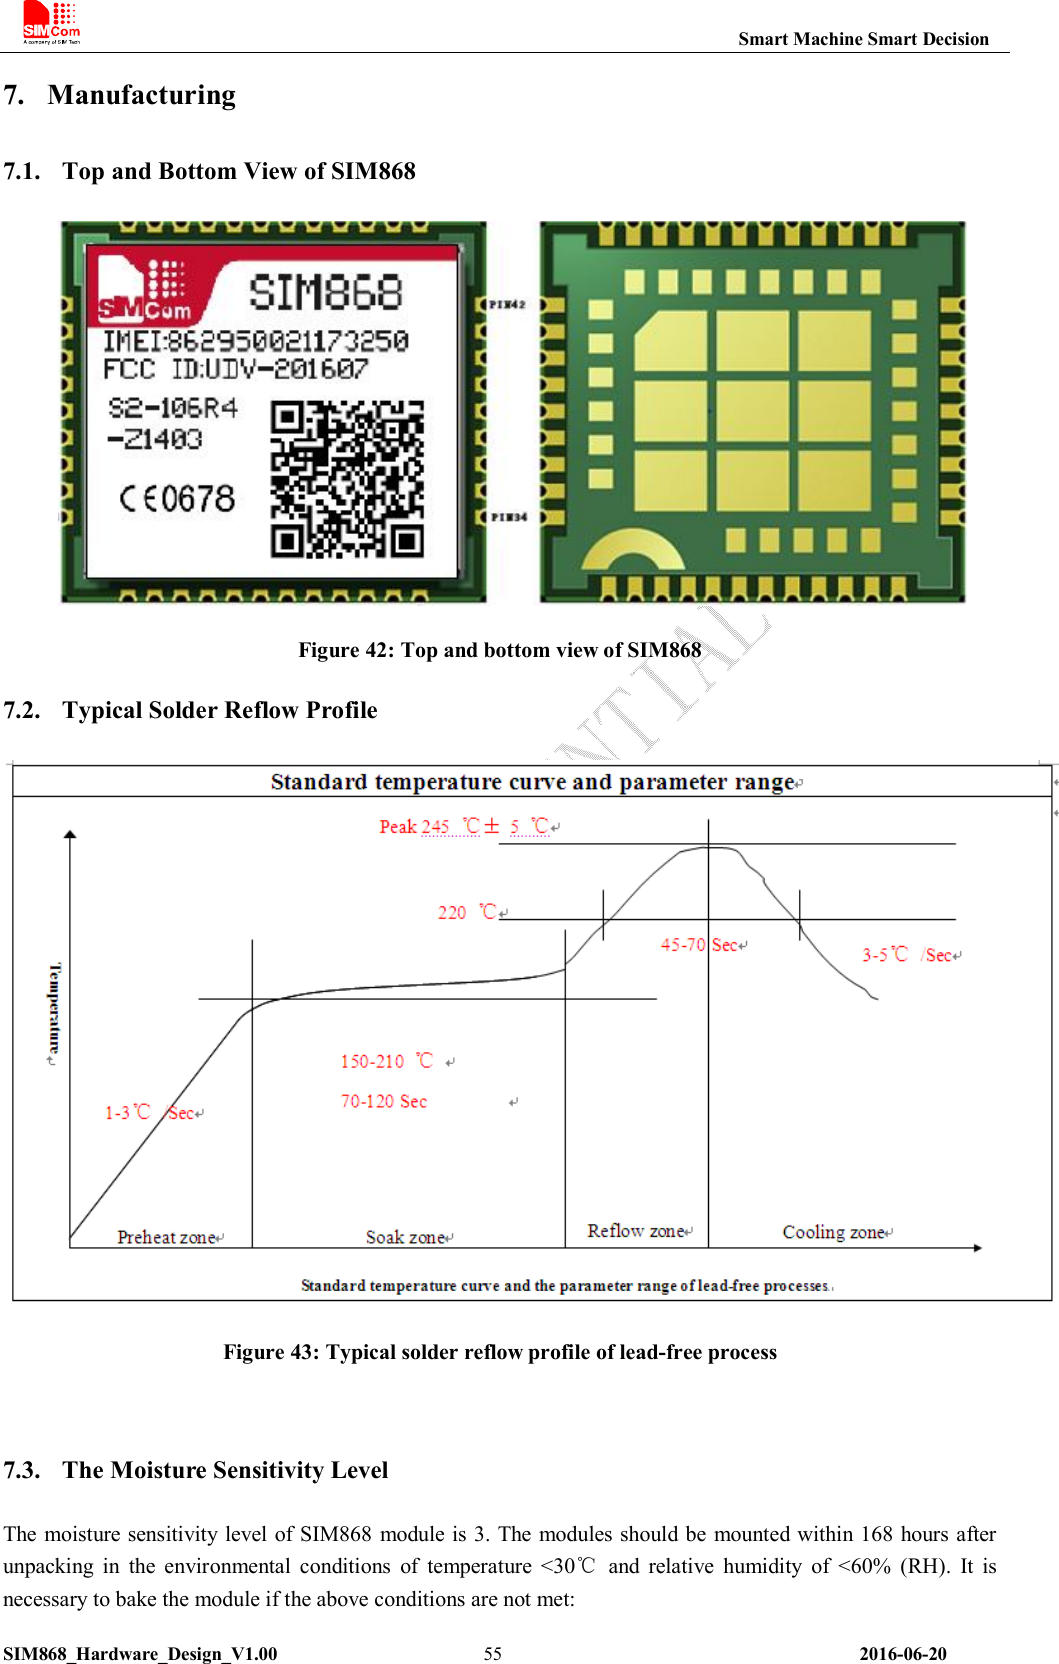                                                                       Smart Machine Smart Decision SIM868_Hardware_Design_V1.00                      55                                                                2016-06-20 7. Manufacturing 7.1. Top and Bottom View of SIM868     Figure 42: Top and bottom view of SIM868 7.2. Typical Solder Reflow Profile   Figure 43: Typical solder reflow profile of lead-free process  7.3. The Moisture Sensitivity Level  The  moisture sensitivity level  of SIM868 module is 3. The modules should be mounted within 168 hours after unpacking  in  the  environmental  conditions  of  temperature  &lt;30℃  and  relative  humidity  of  &lt;60%  (RH).  It  is necessary to bake the module if the above conditions are not met: 